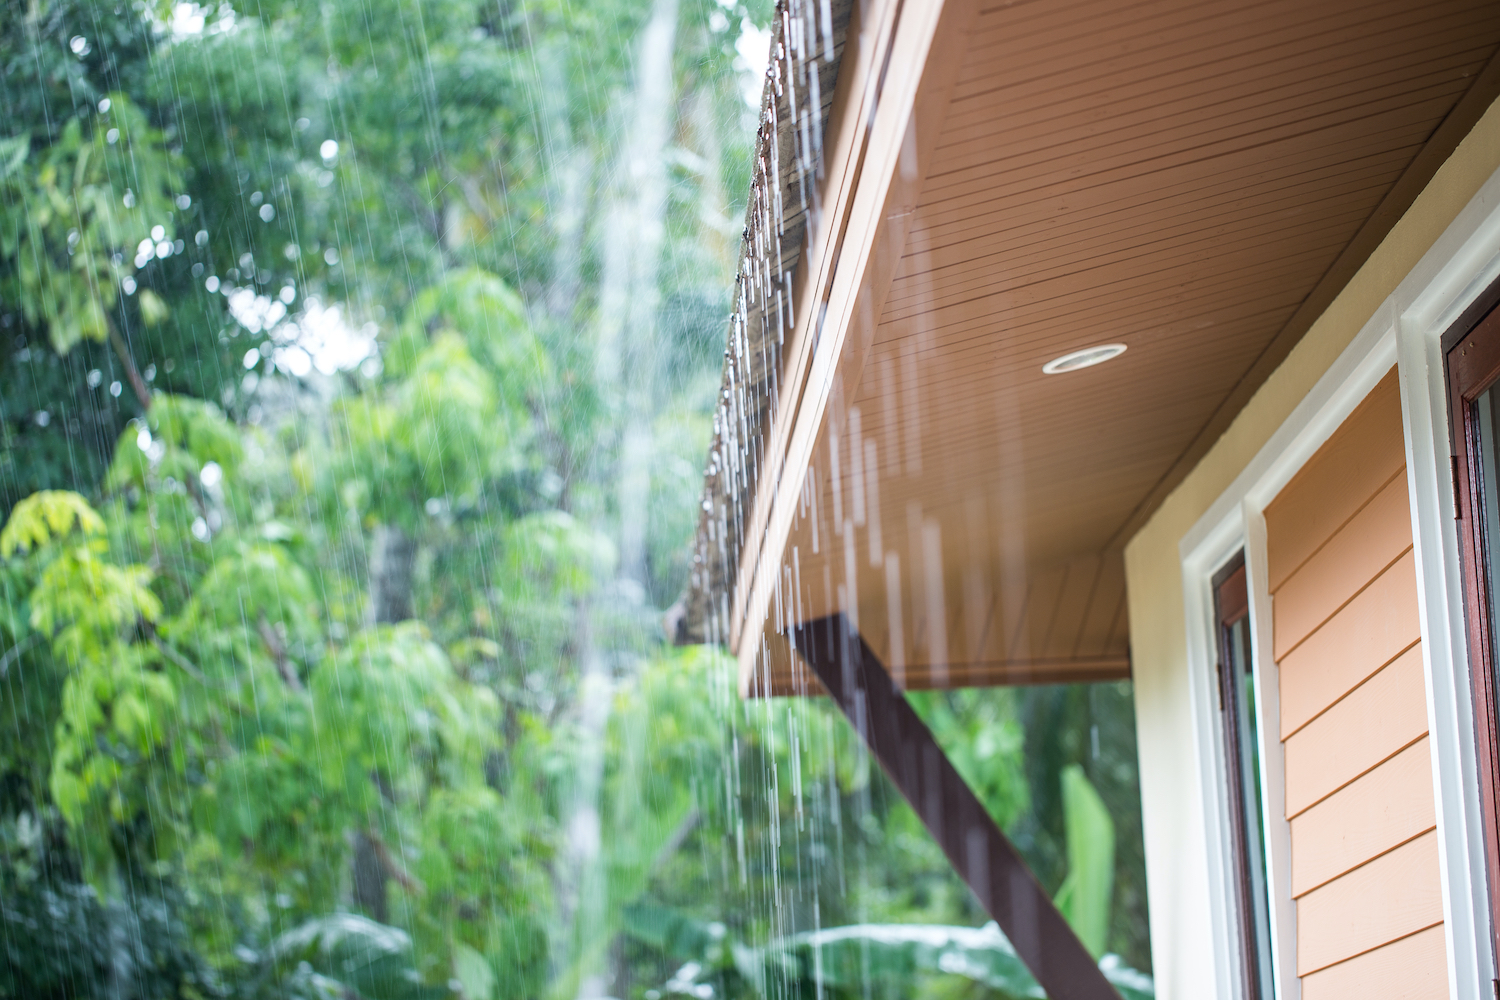 In Need of a Friendswood Roof Repair Due to the Rain? Amstill Roofing Can Repair it in One Day!